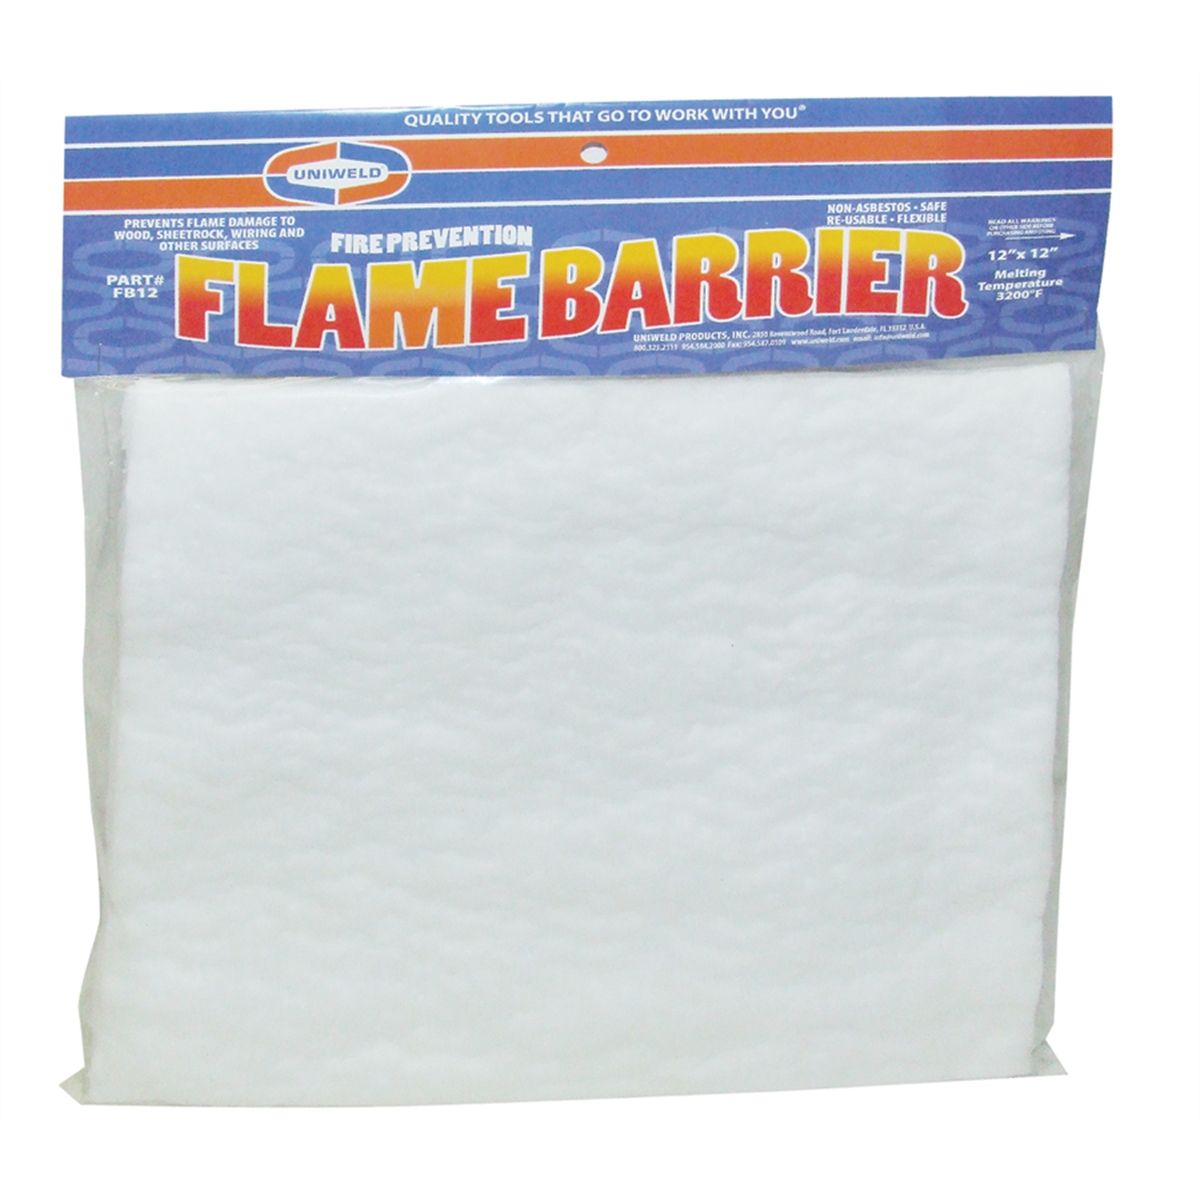 Flame Barrier(TM) Fire Resistant Material